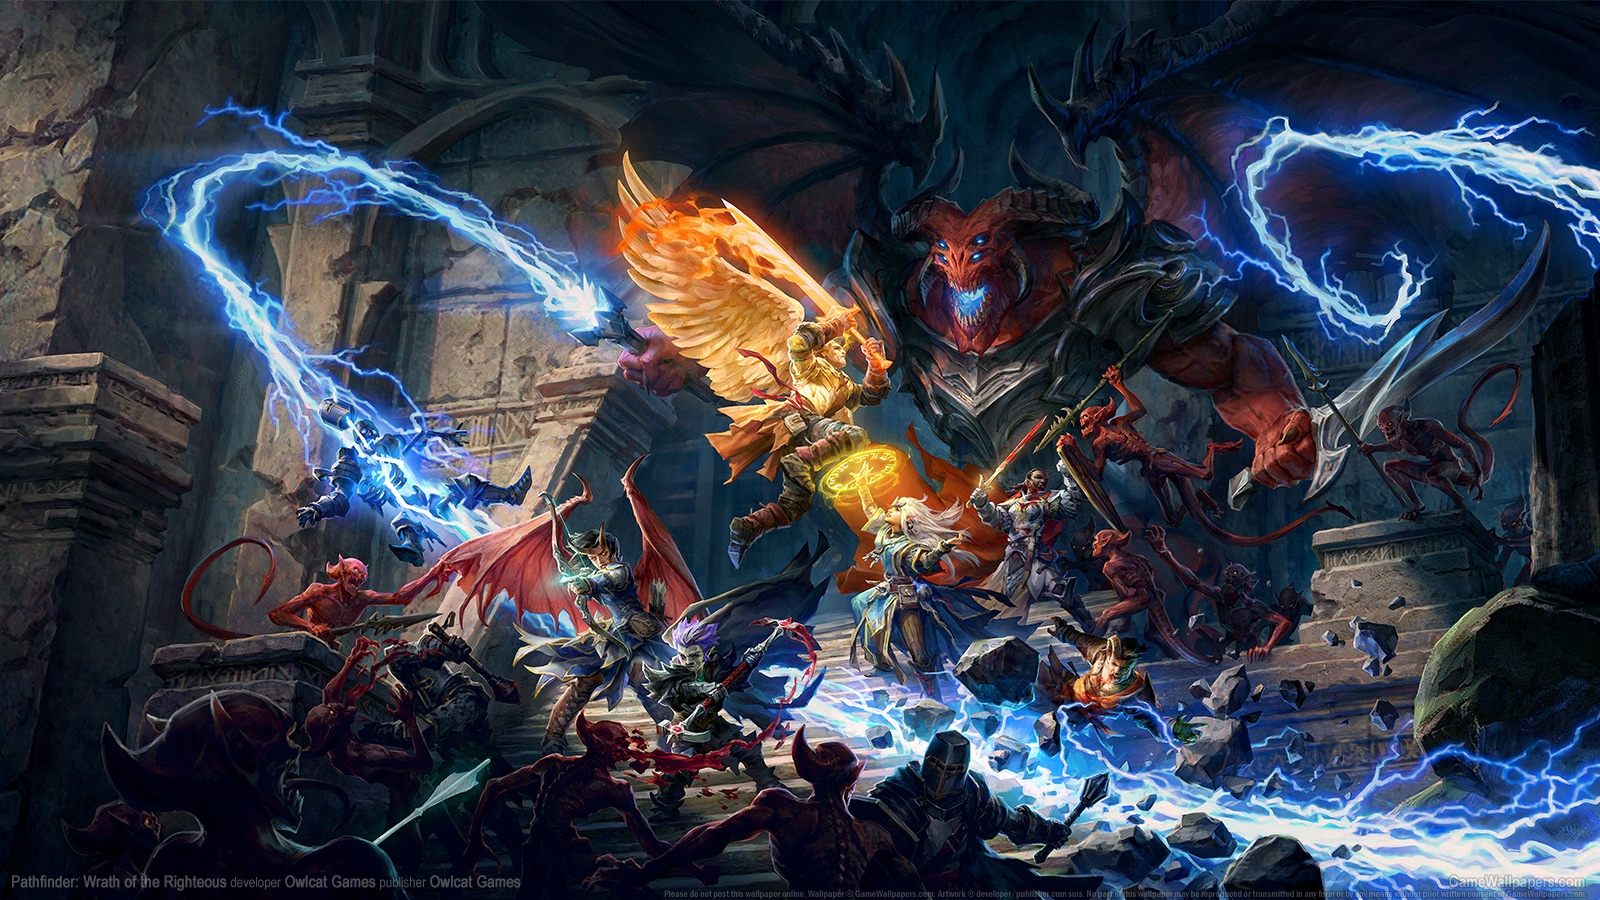 Pathfinder: Wrath of the Righteous 1600x900 wallpaper or background 01